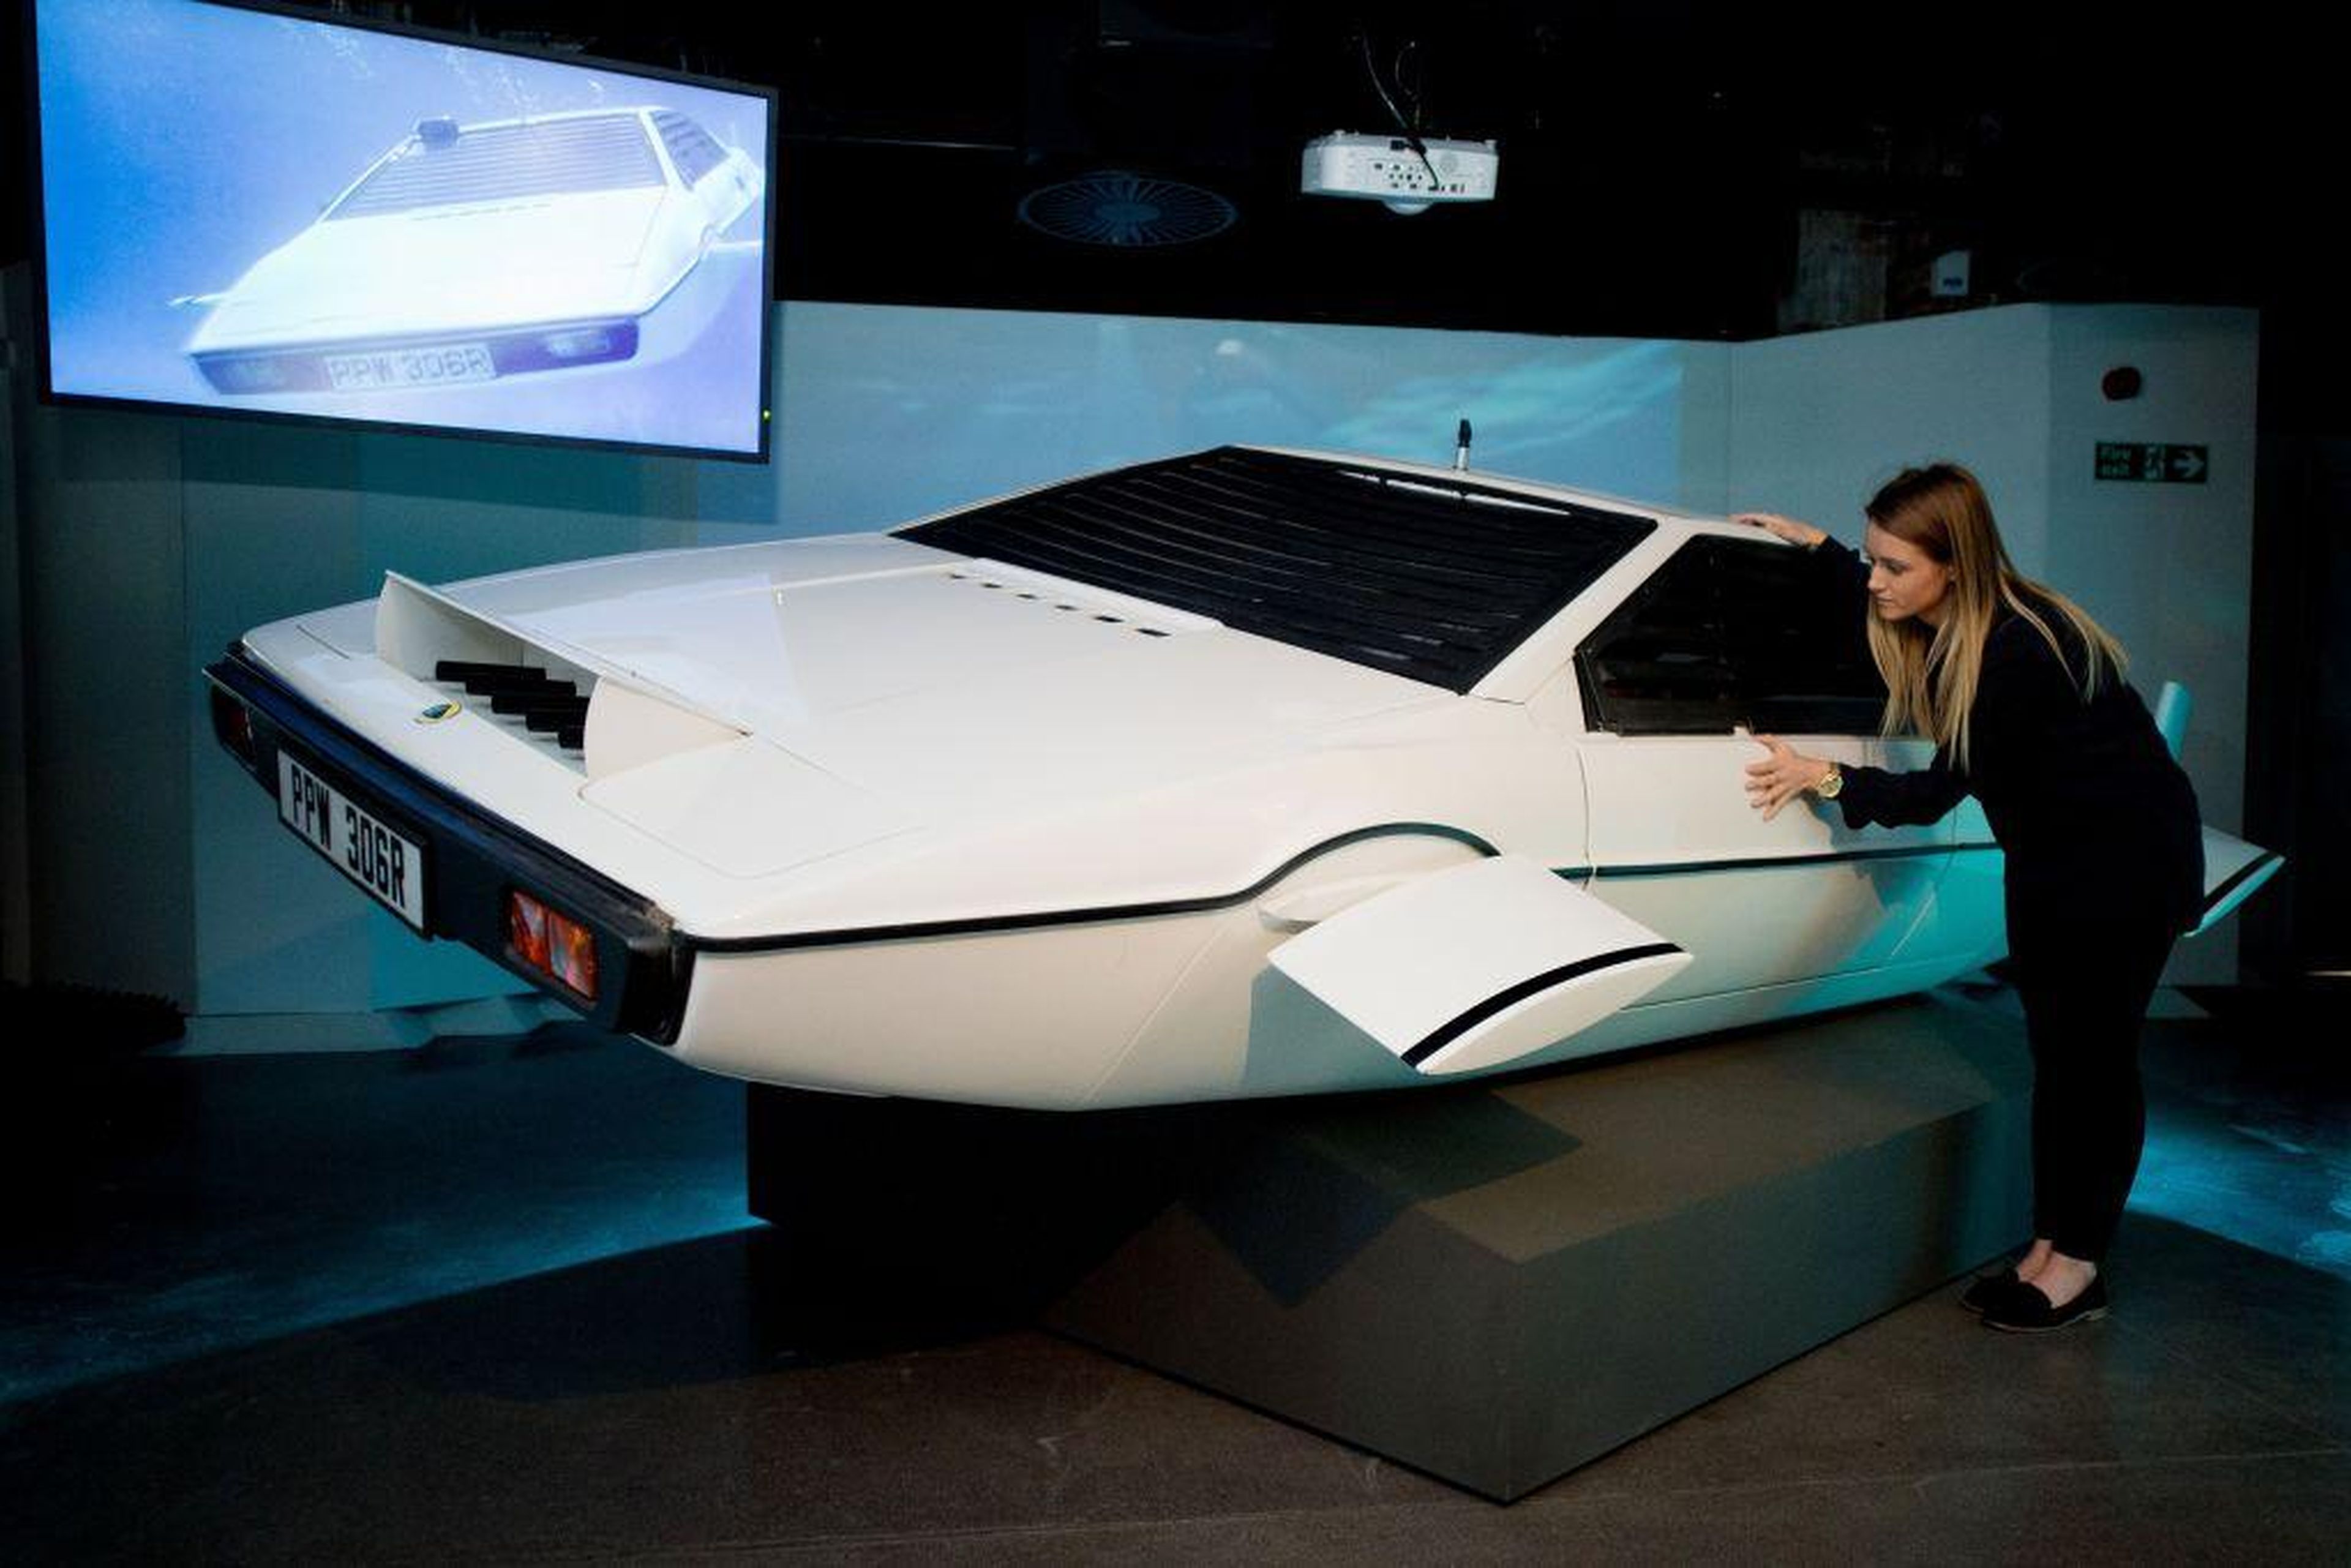 So was the Lotus Esprit S1 from the 1977 James Bond flick "The Spy Who Loved Me." That film car transformed into a submarine — and Musk actually owns the original.